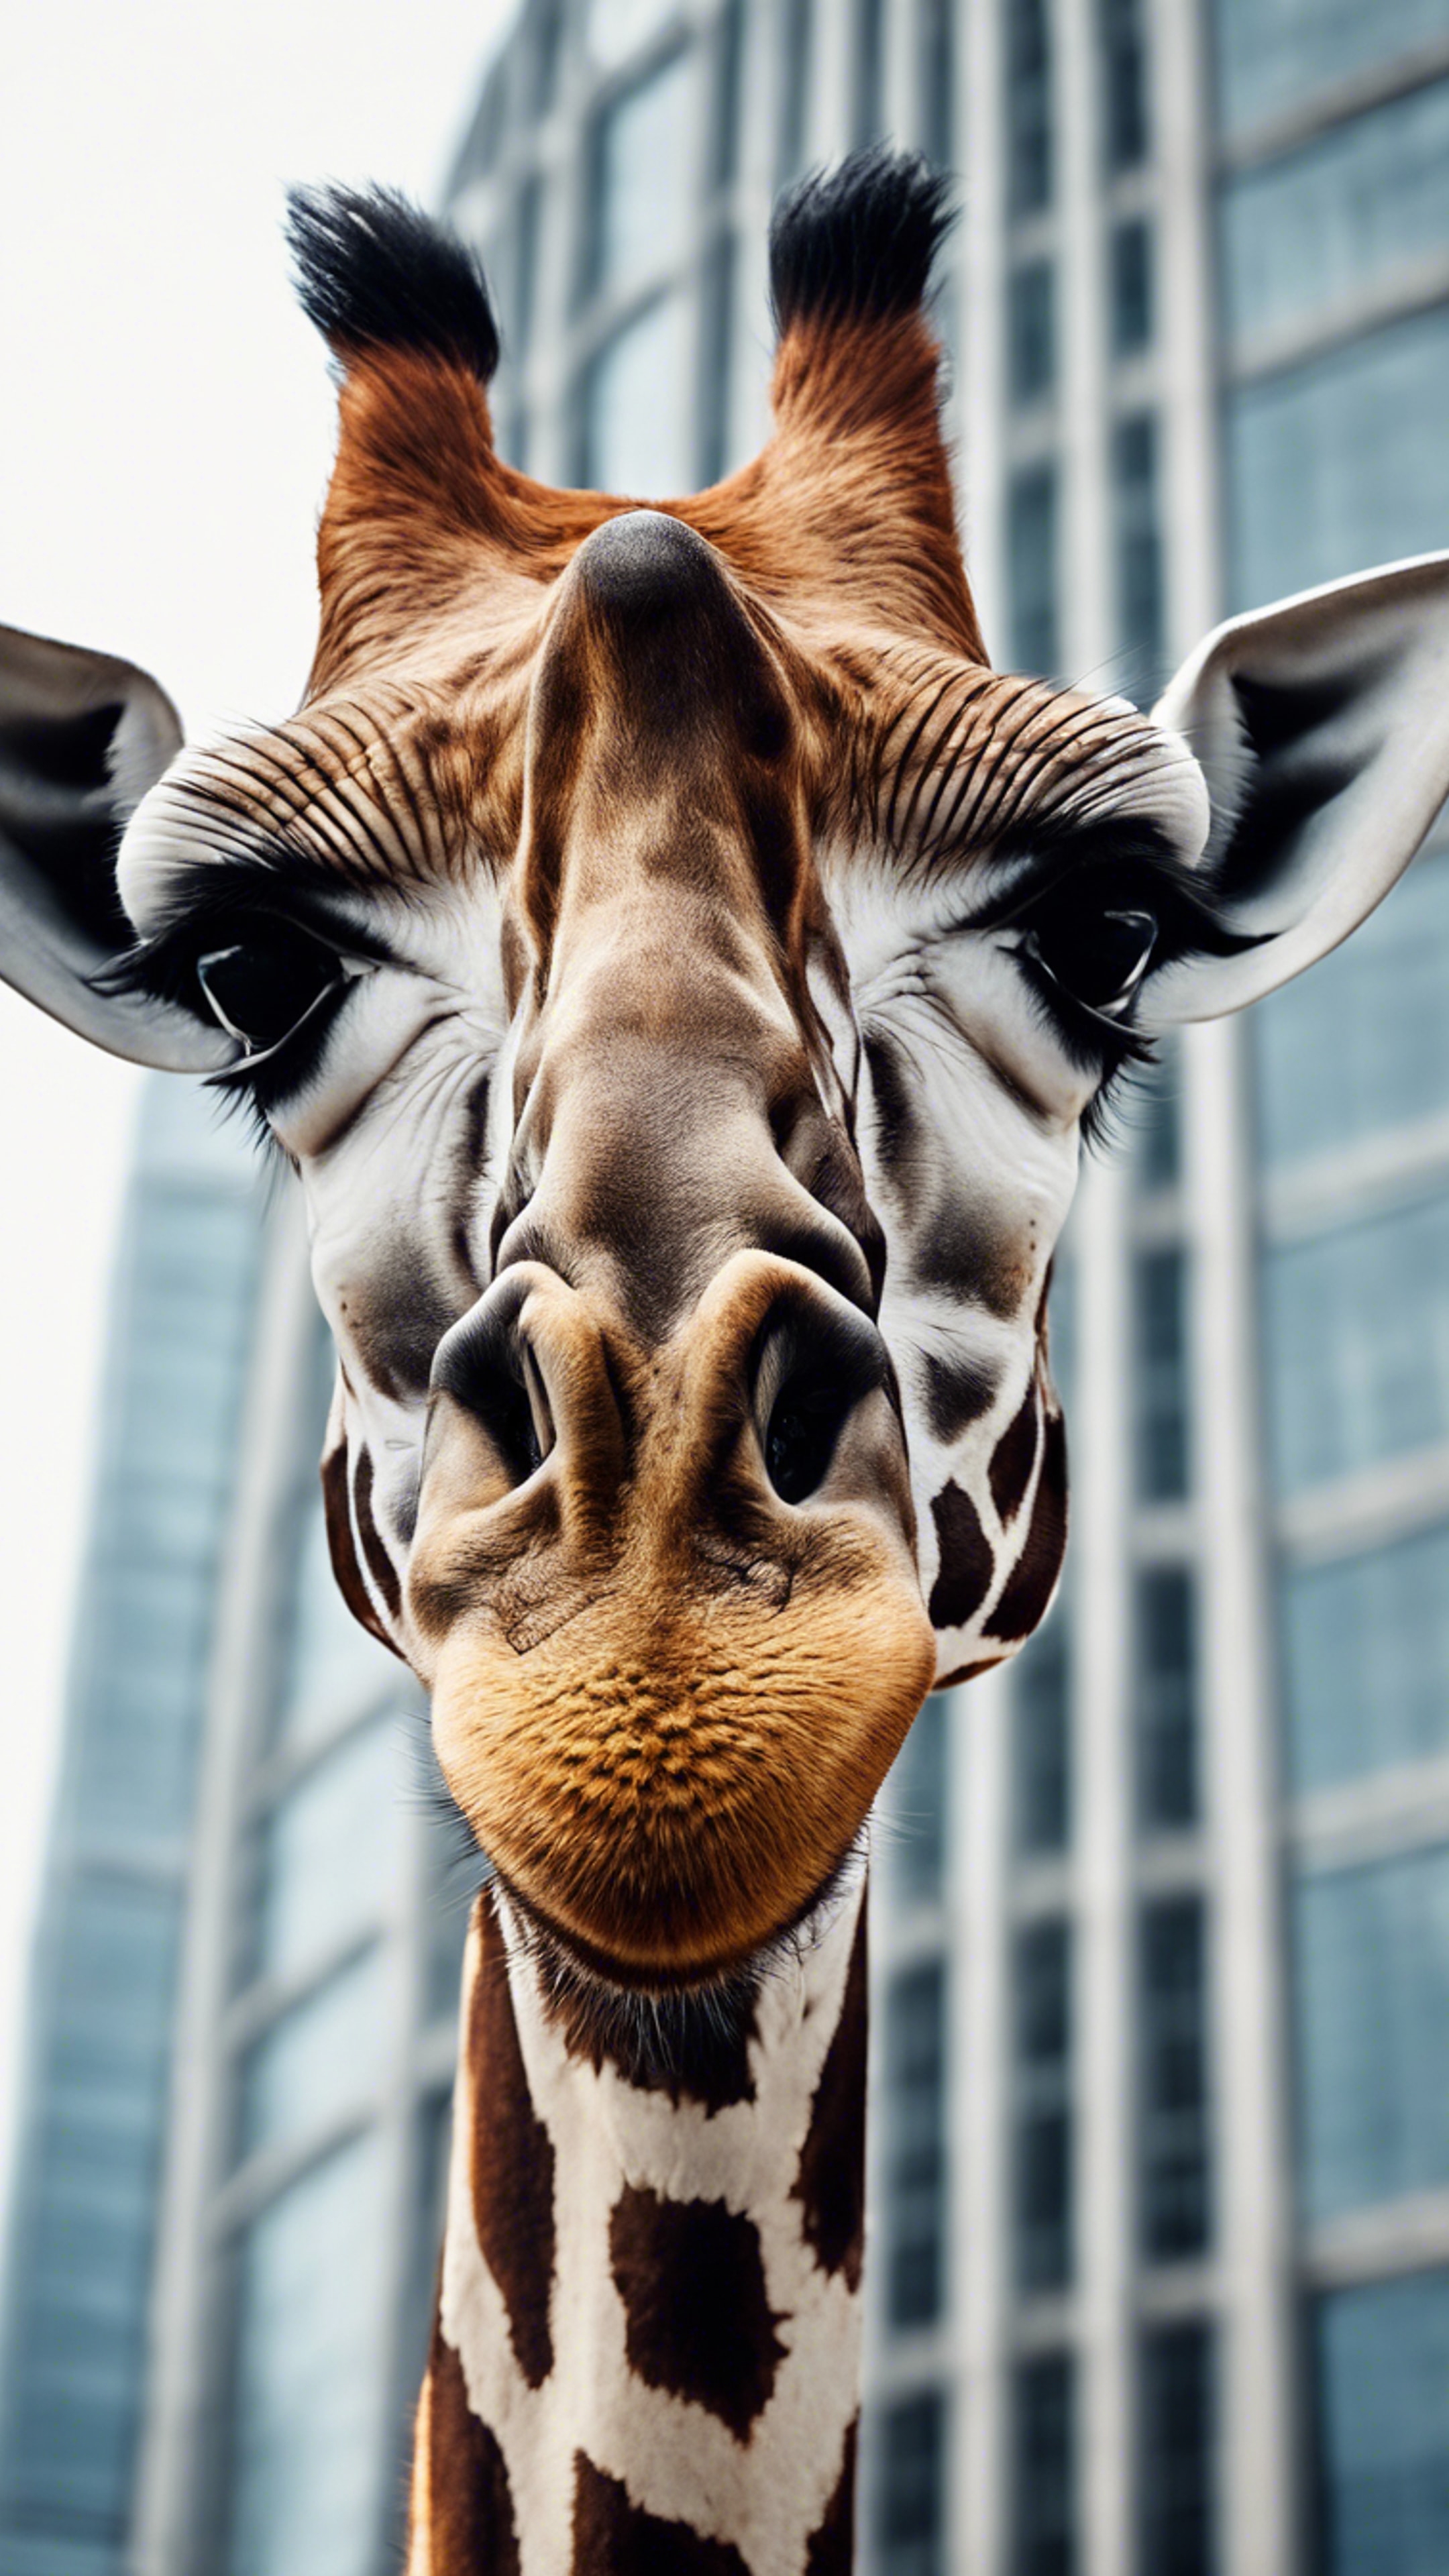 A giraffe in an urban setting, poking its head out from behind a skyscraper, symbolising wild nature confronting urbanisation. Wallpaper[4646bbcdc786429d9f19]